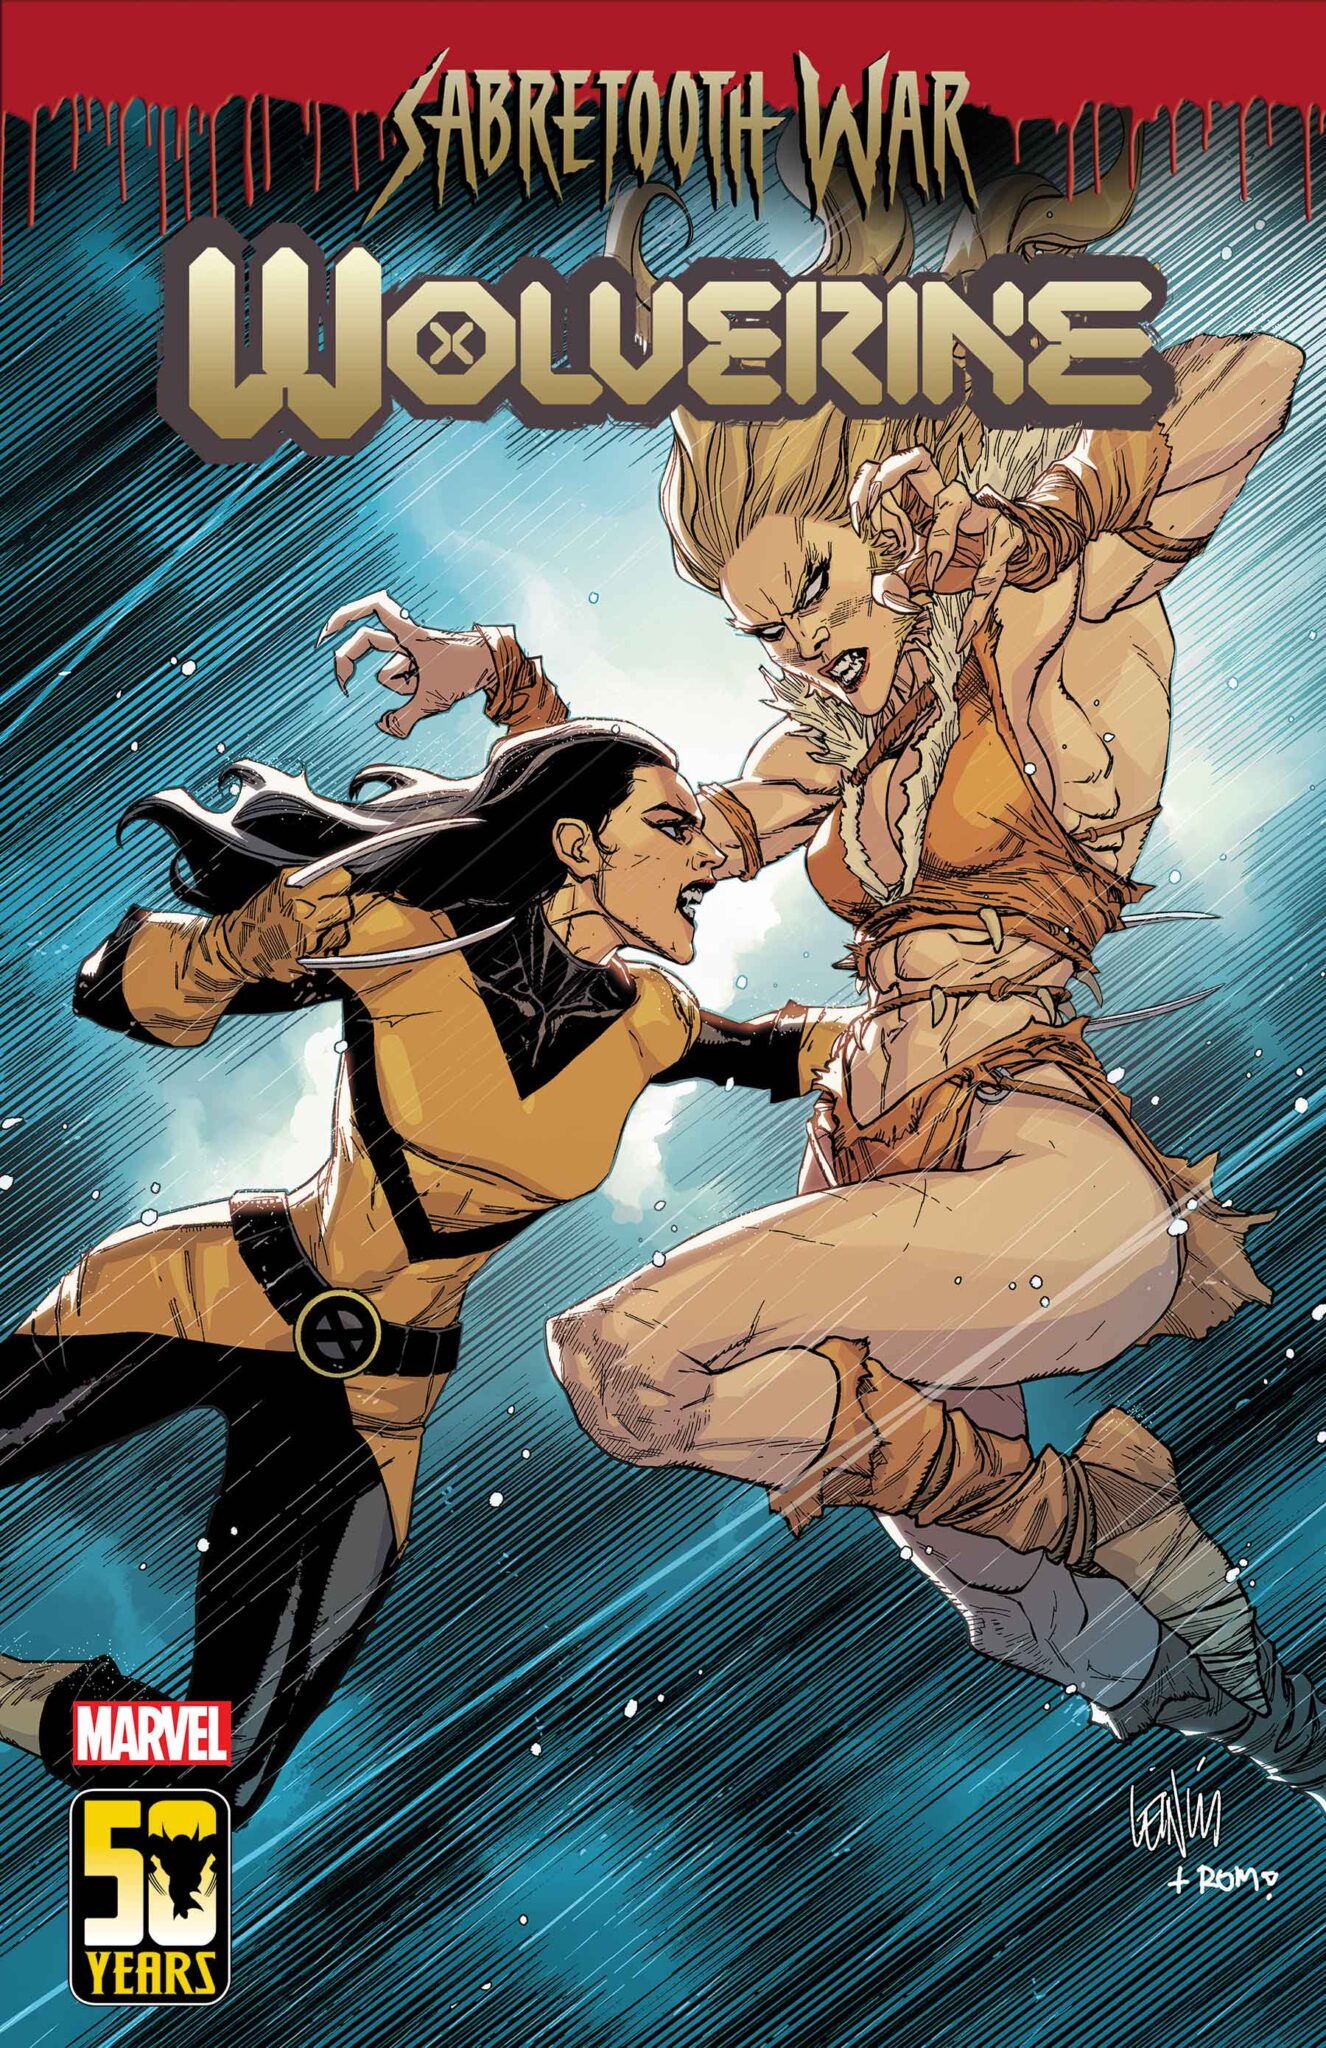 Wolverine #47 cover